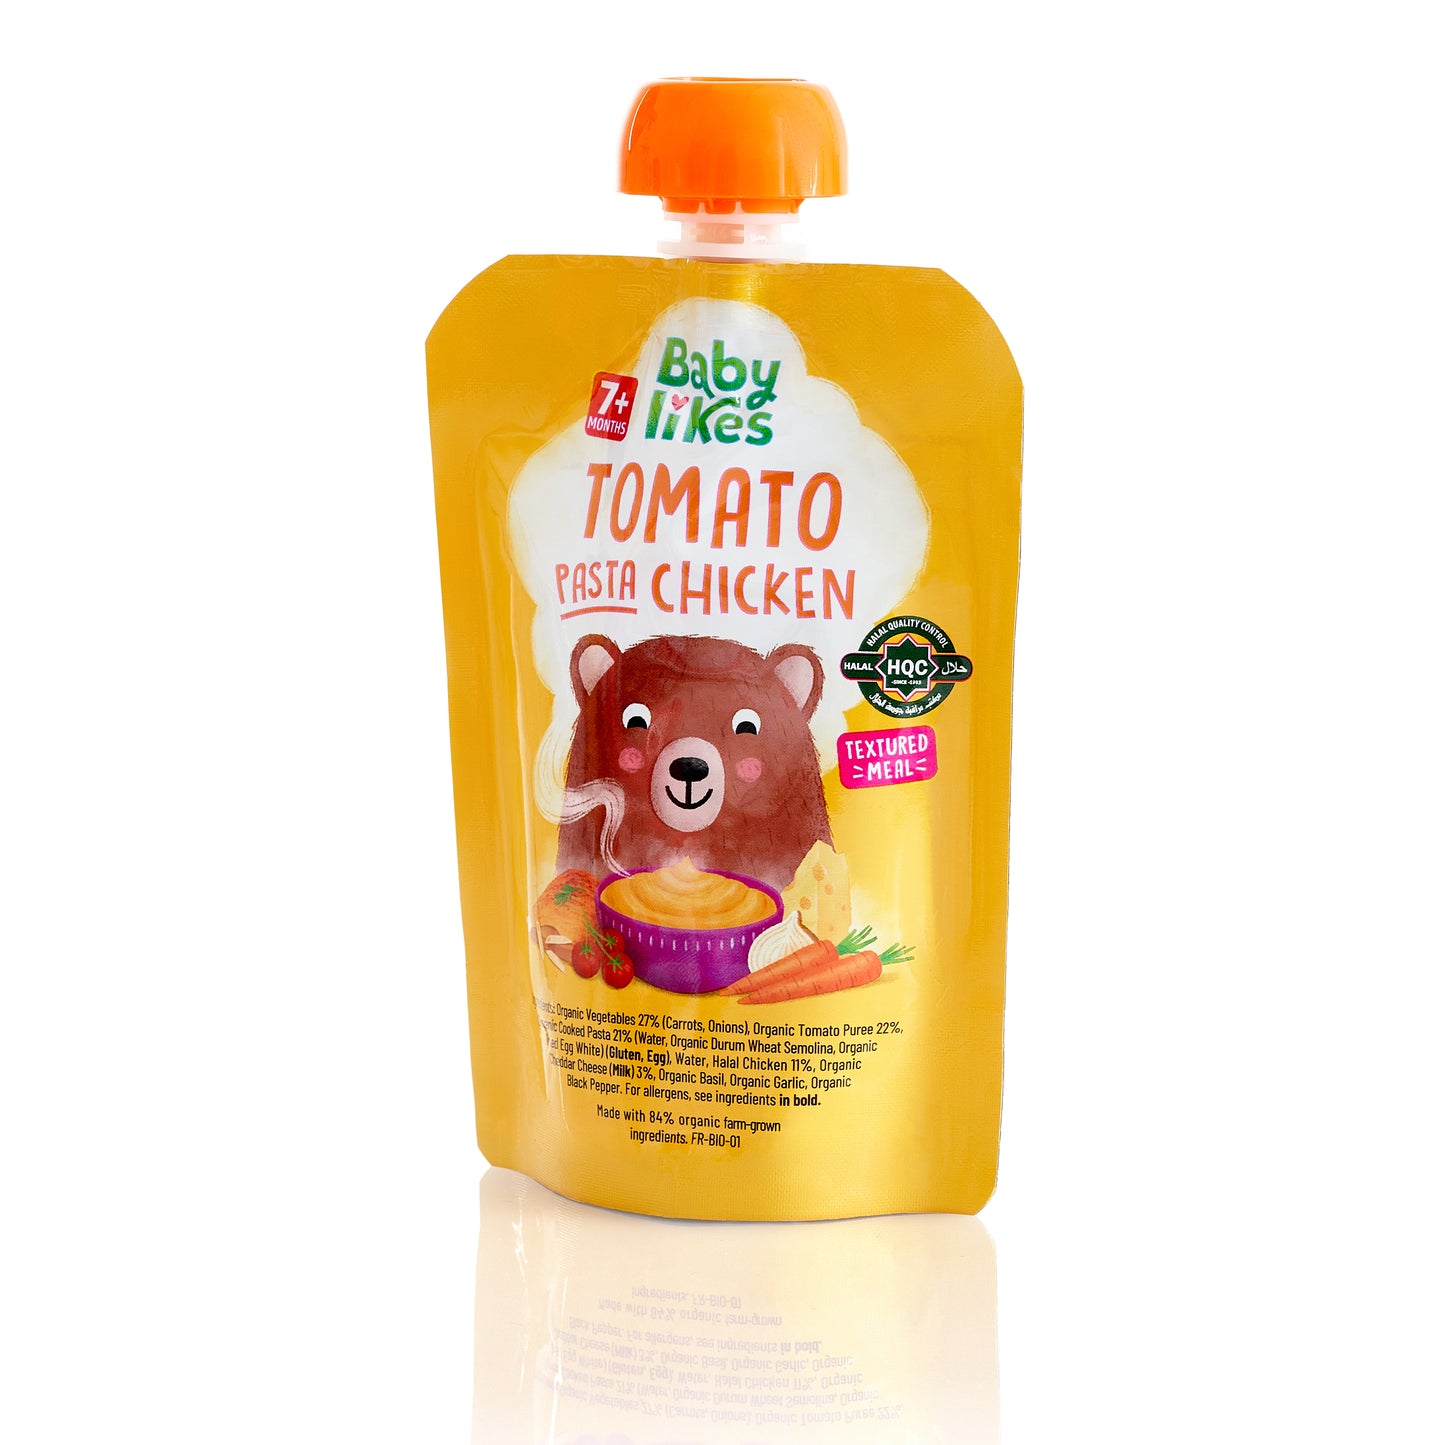 Tomato Pasta Chicken 130 grams - Baby Puree for 7+ months